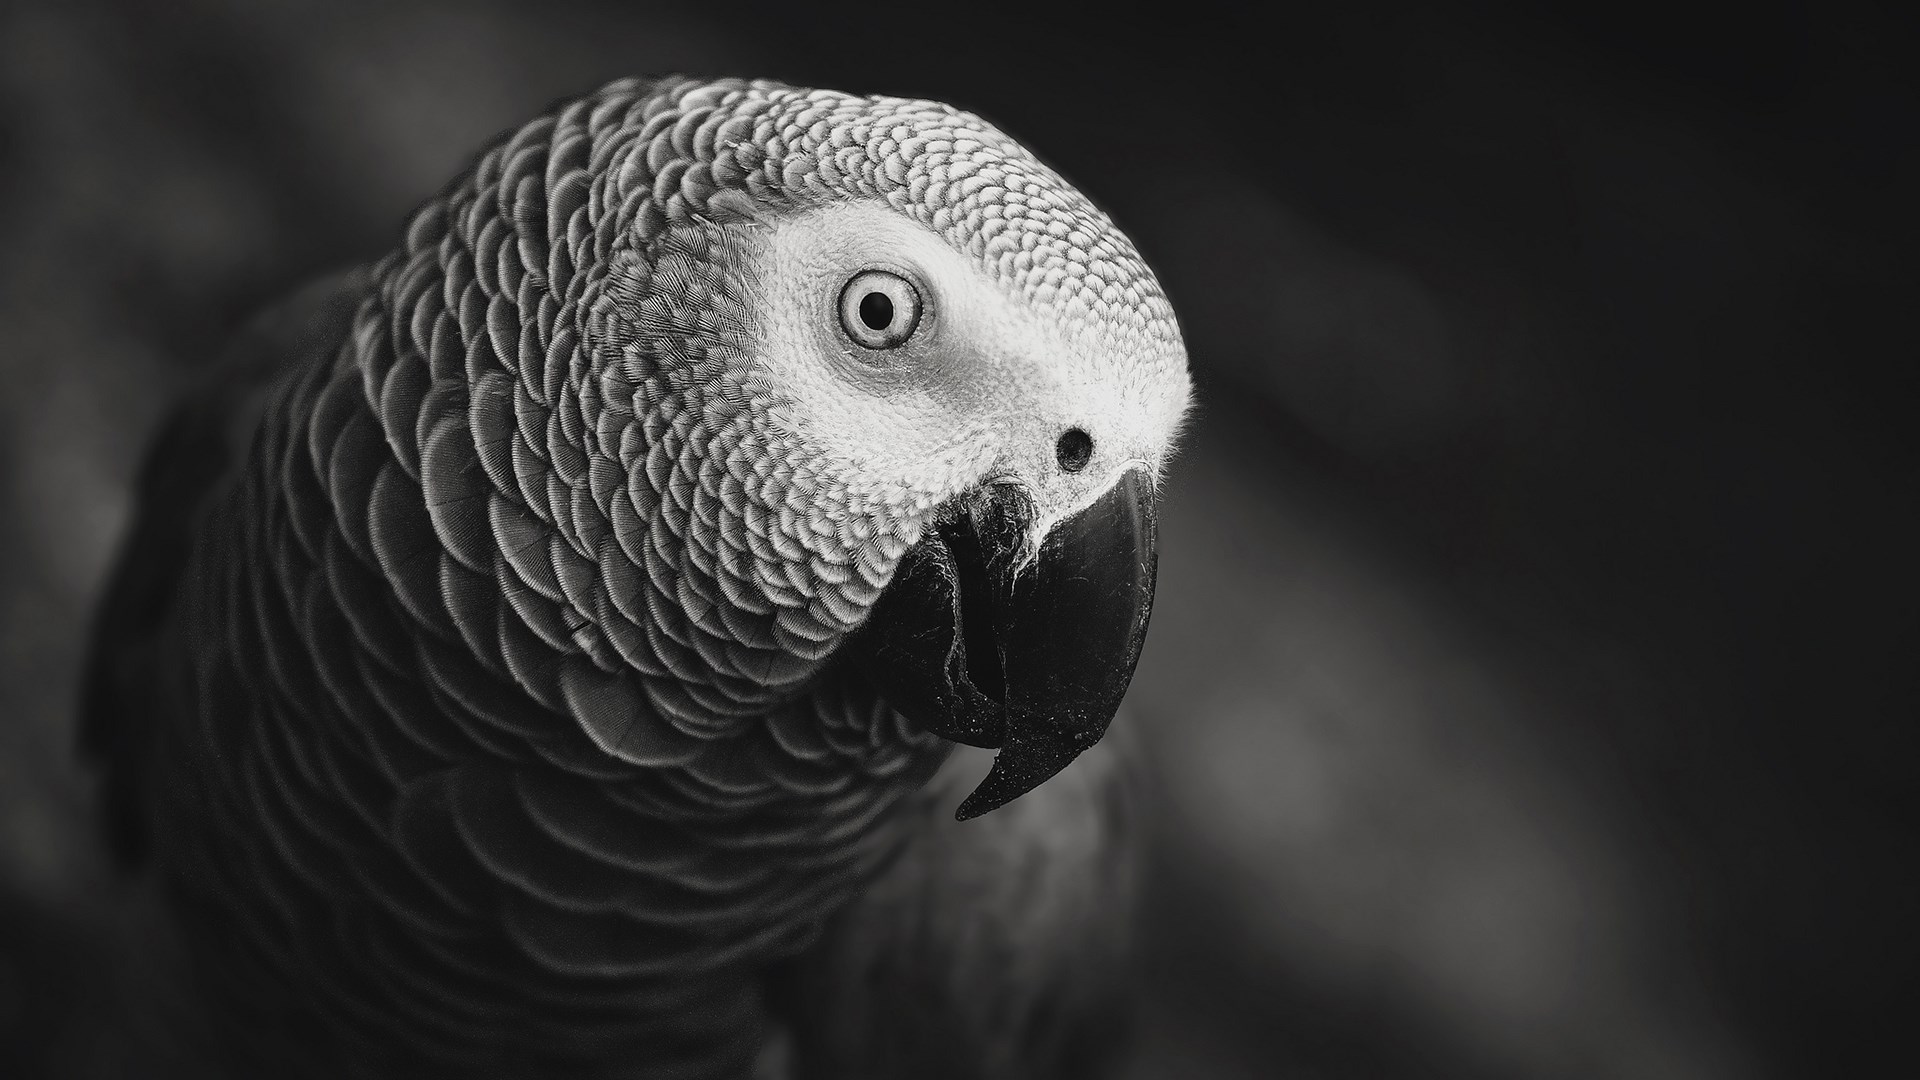 Grey Parrot Wallpapers - HD Wallpapers Backgrounds of Your Choice